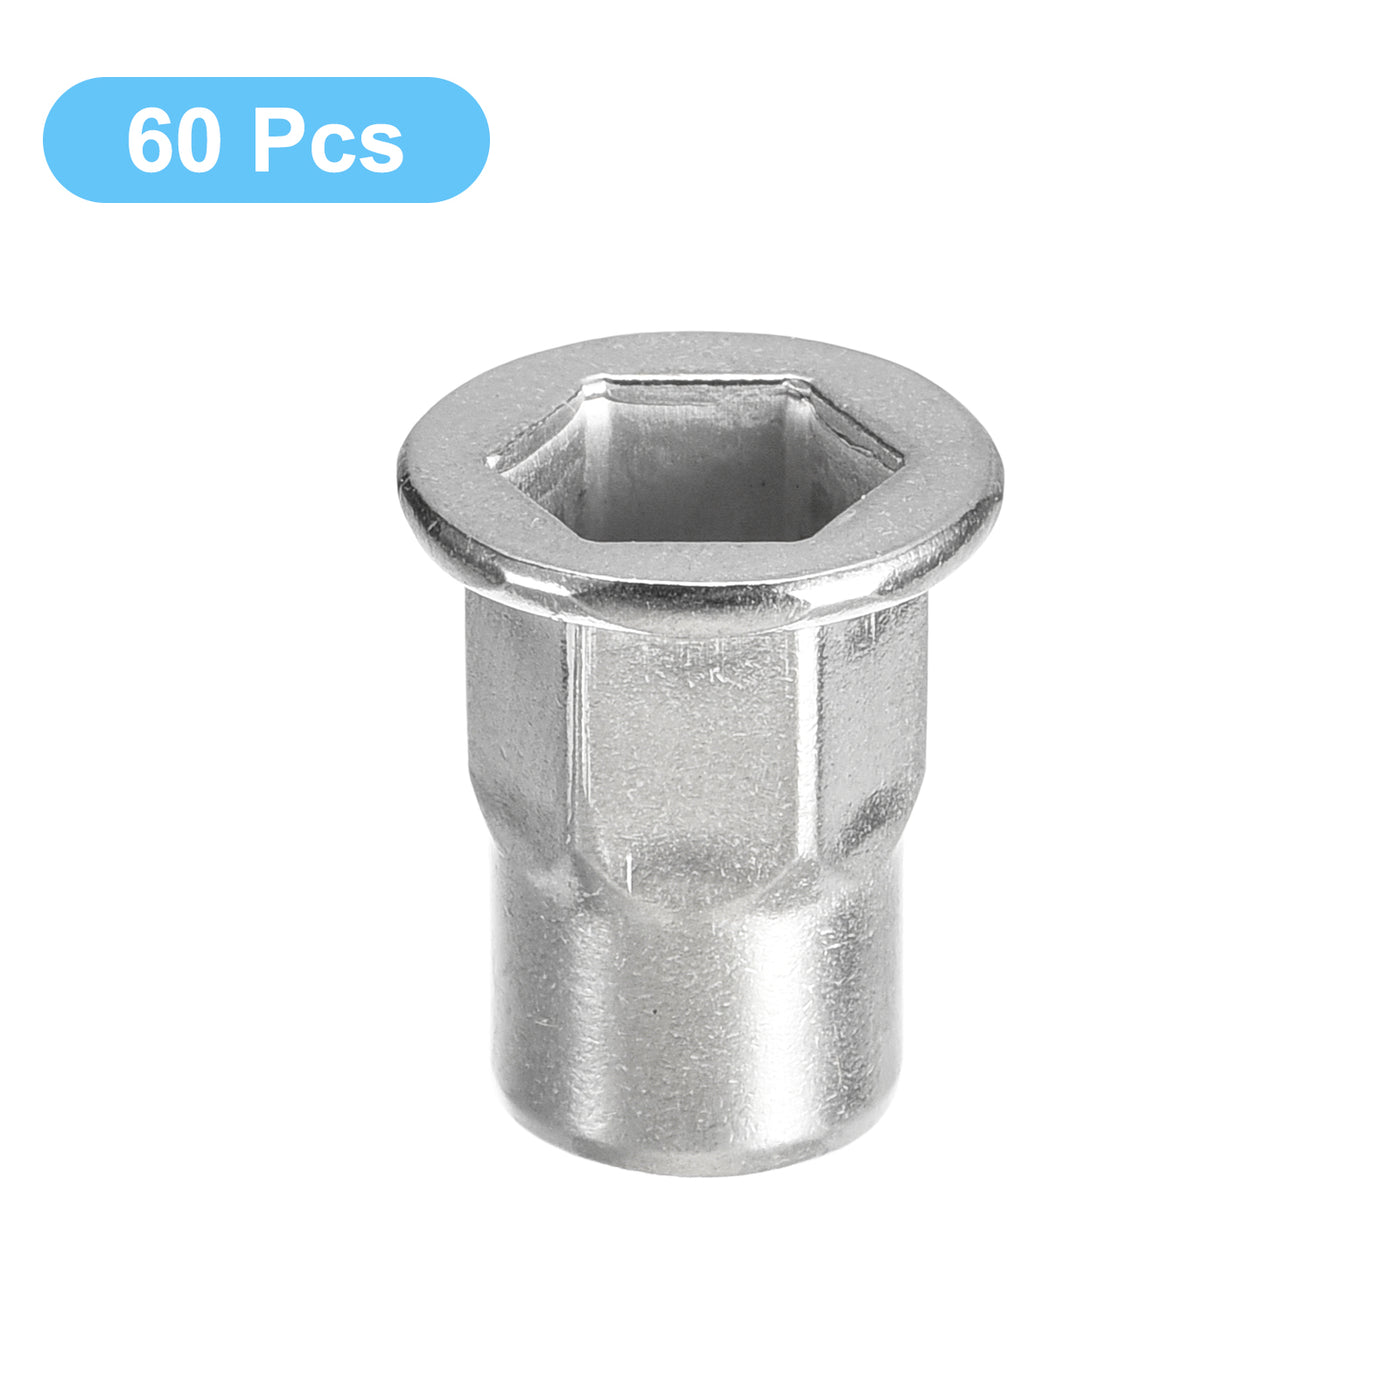 uxcell Uxcell Half Hex Body Rivet Nuts, 304 Stainless Steel Flat Head Threaded Insert Nuts